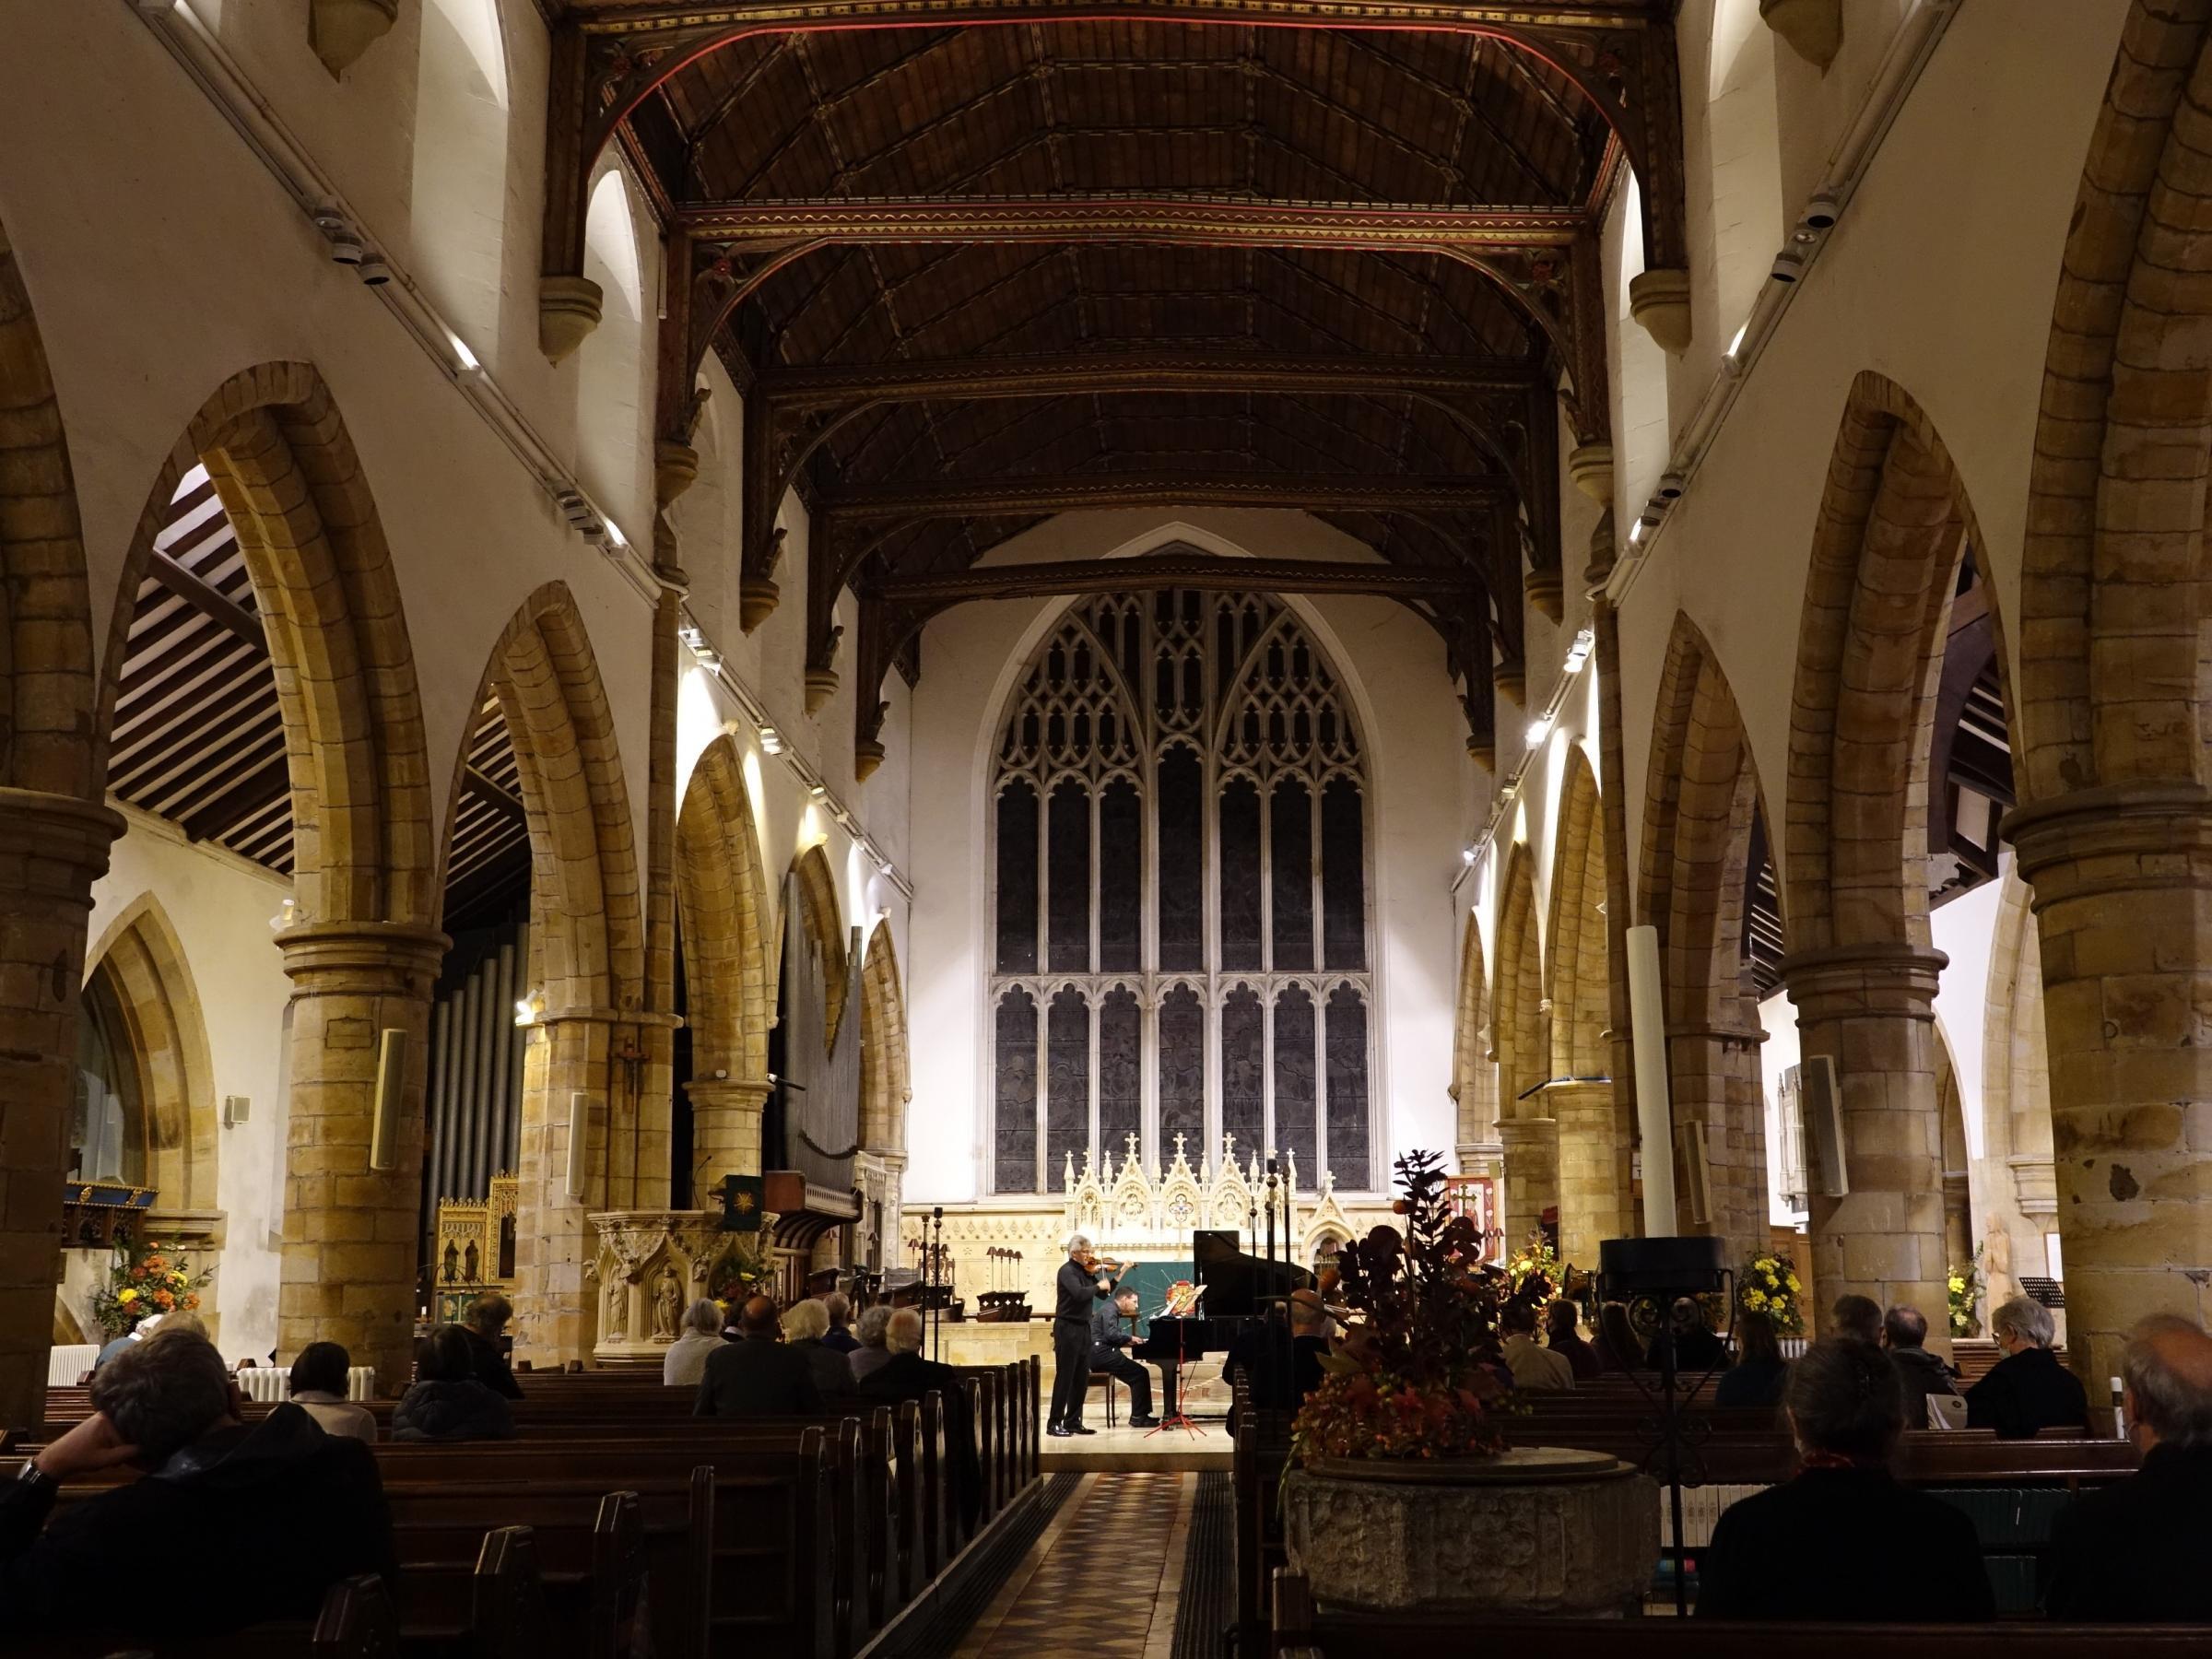 The English Music Festival will be taking place at St Marys Church, Horsham in May, including performances by the New Foxtrot Serenaders and by baritone singer Roderick Williams